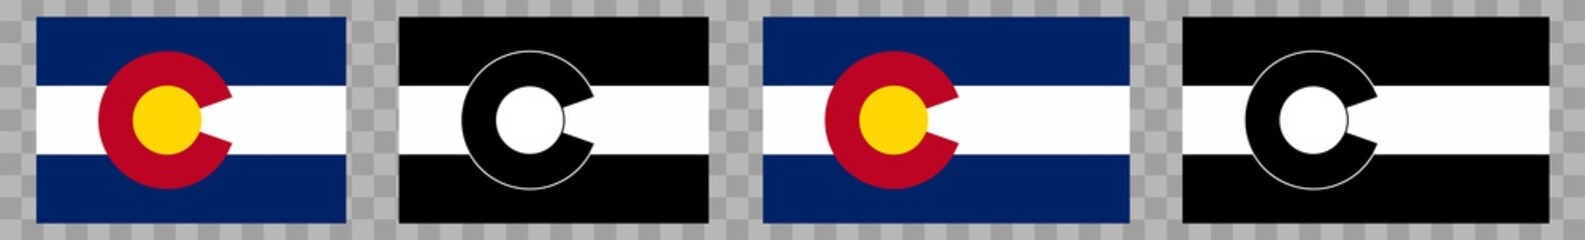 Colorado Flag Colors Black | State Flags | Banner | Symbol | Vector | Isolated | Variations